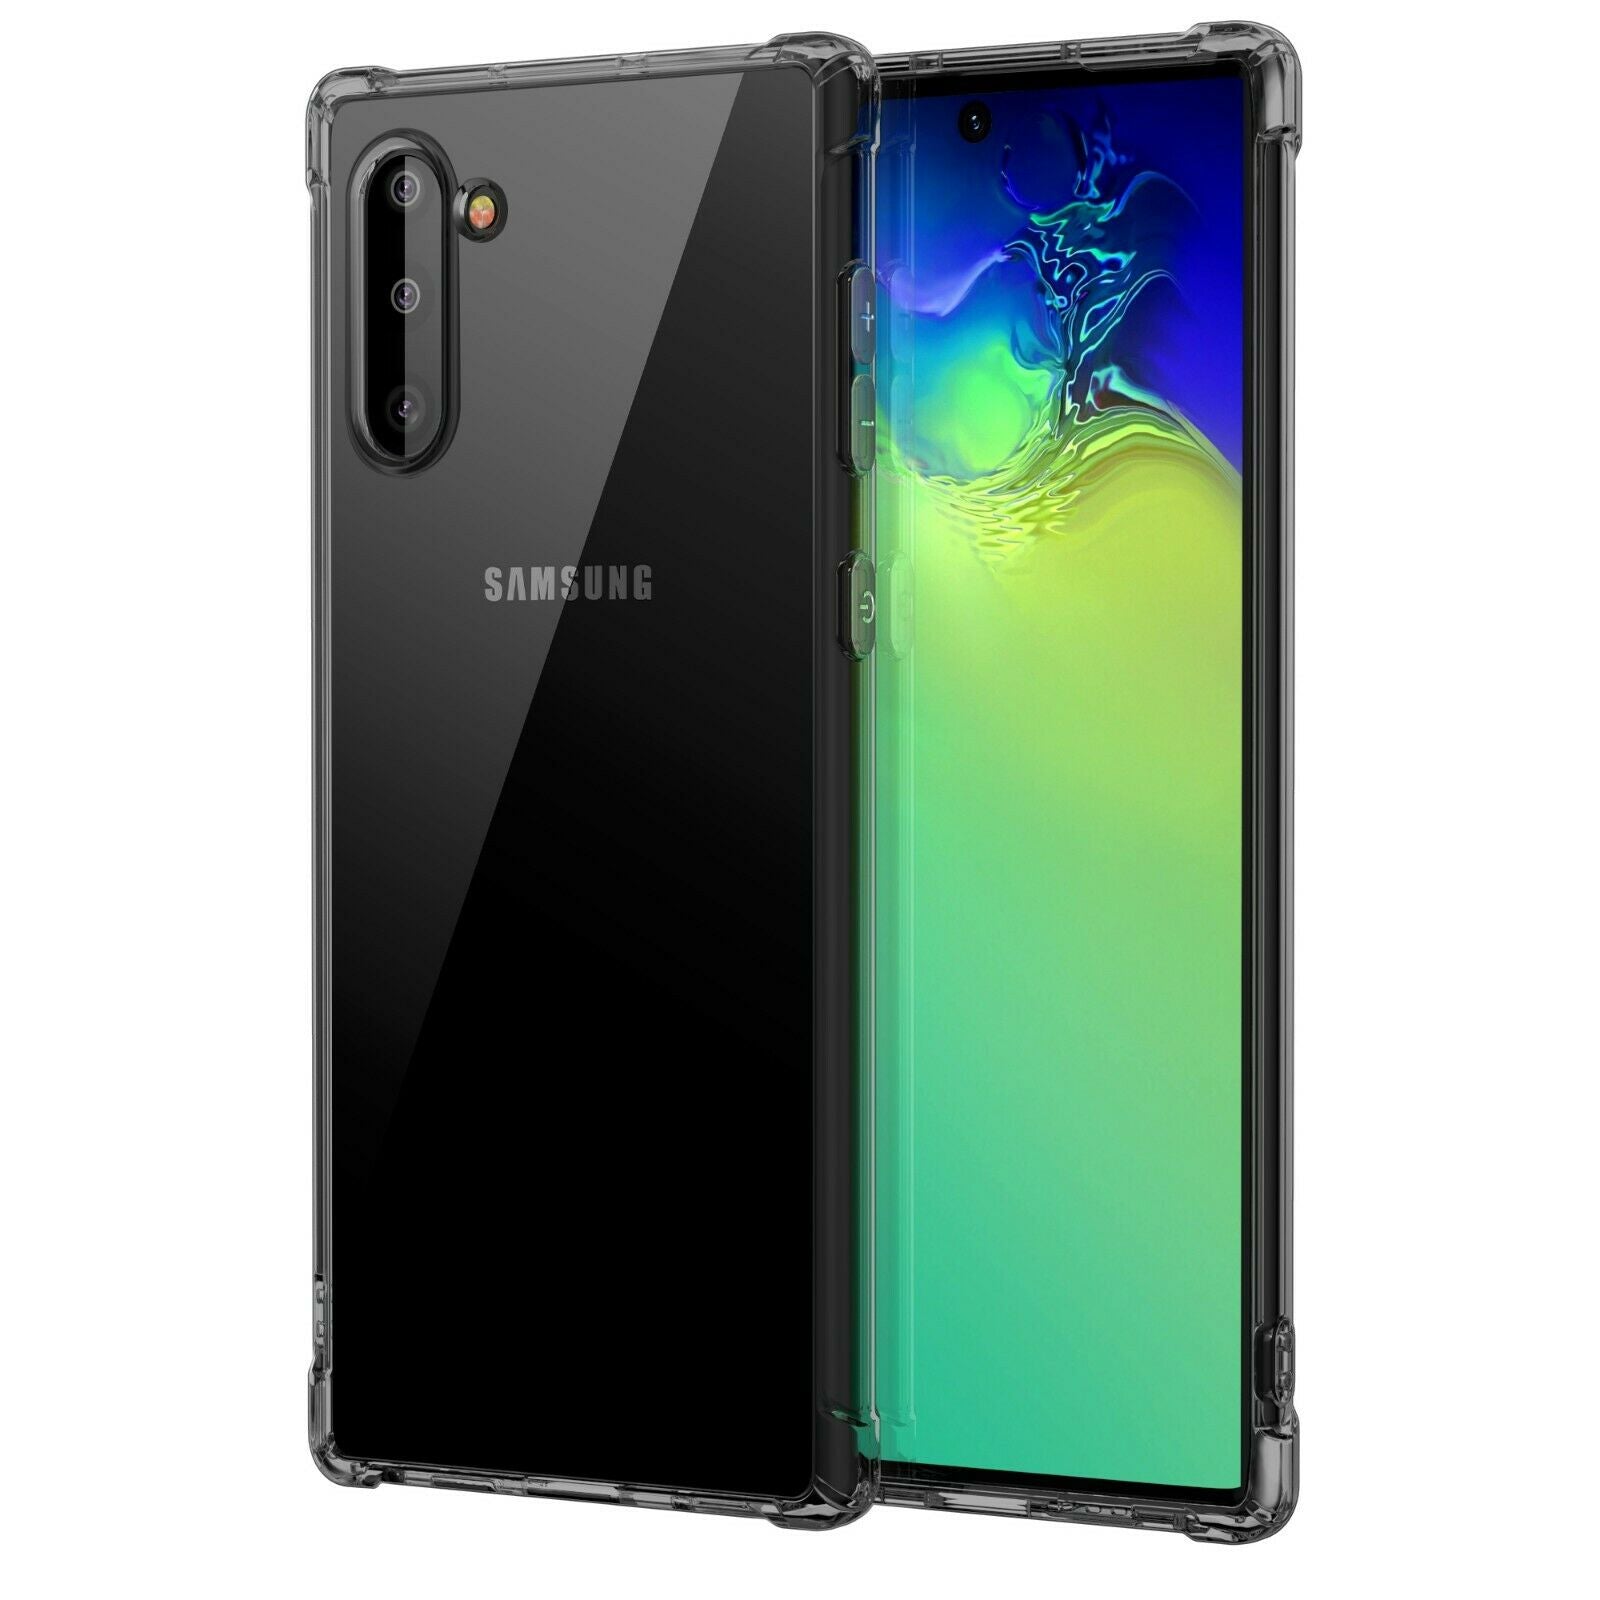 Samsung Galaxy Note 10 Case Clear Heavy Duty Shockproof Slim Cover